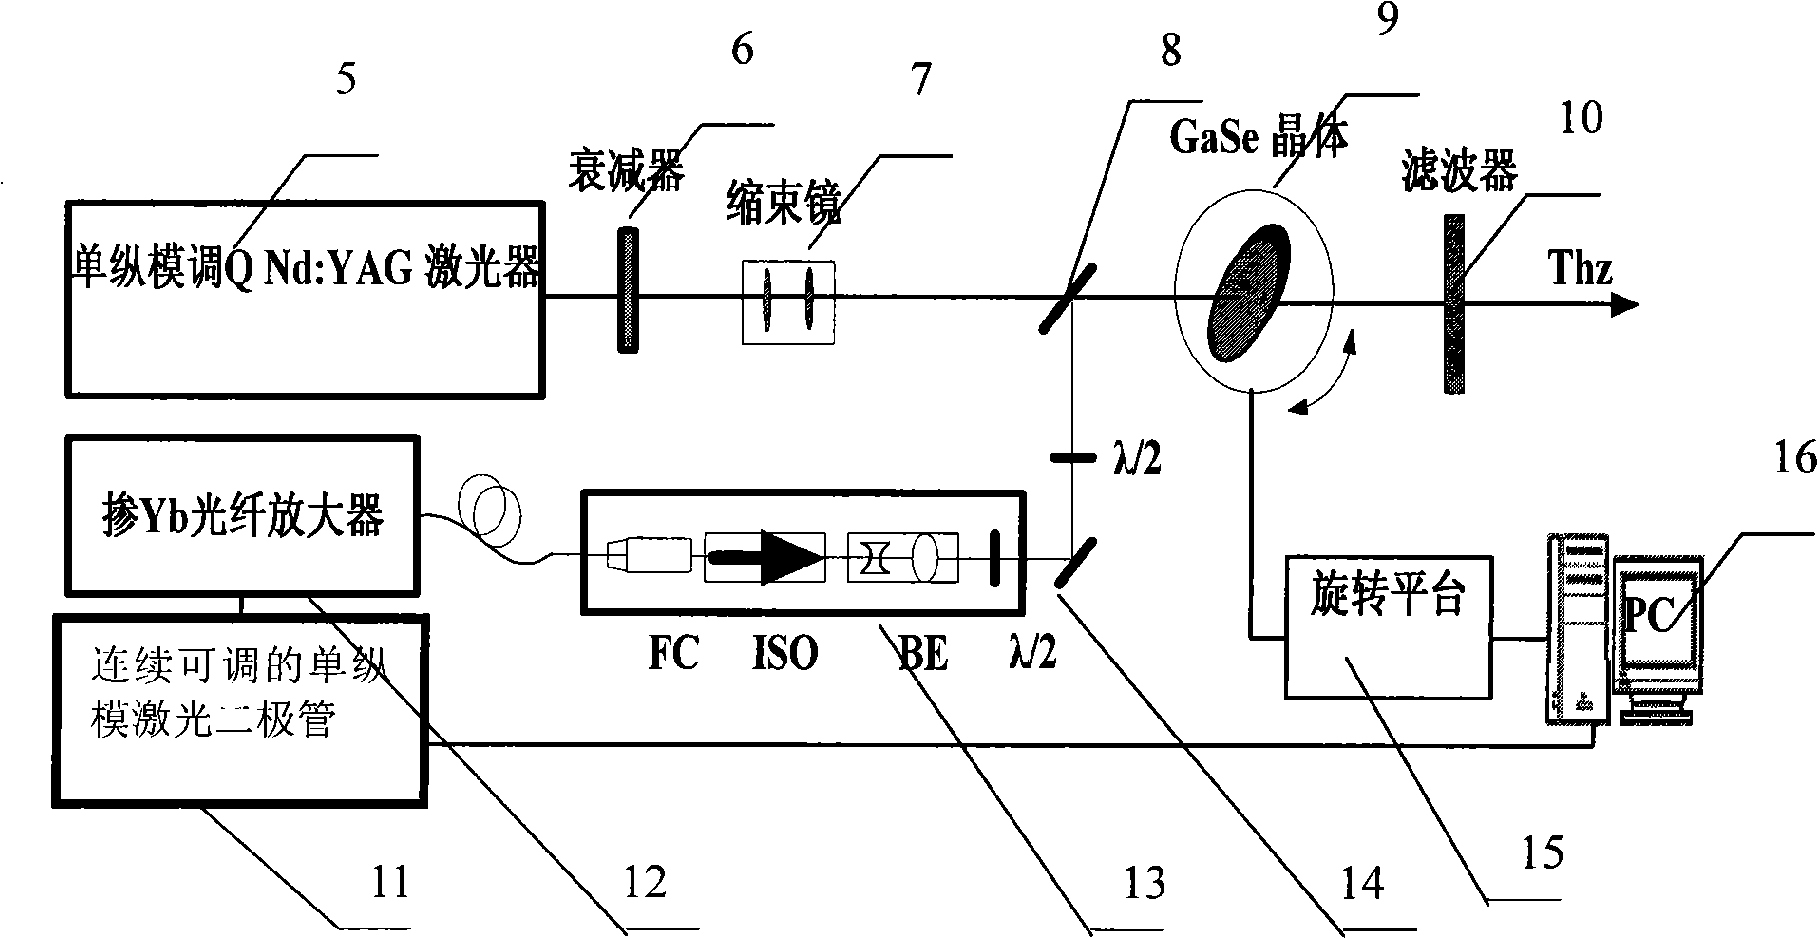 Apparatus for generating tunable narrow band terahertz band wave by optical difference frequency